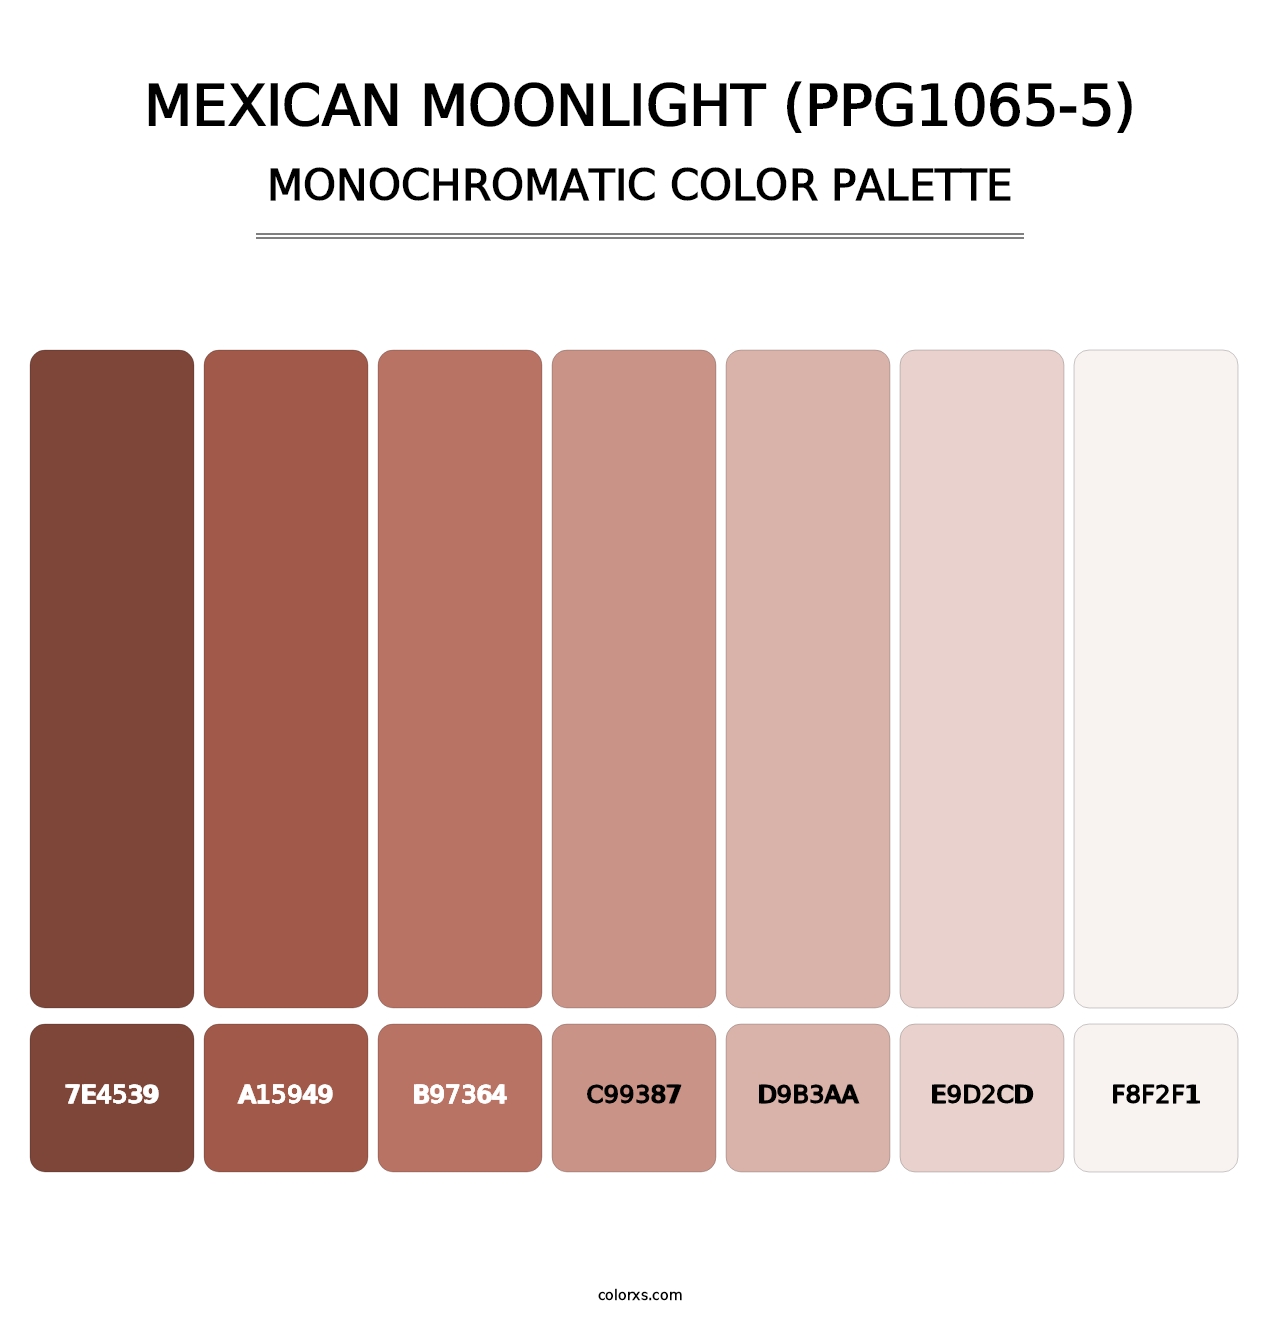 Mexican Moonlight (PPG1065-5) - Monochromatic Color Palette